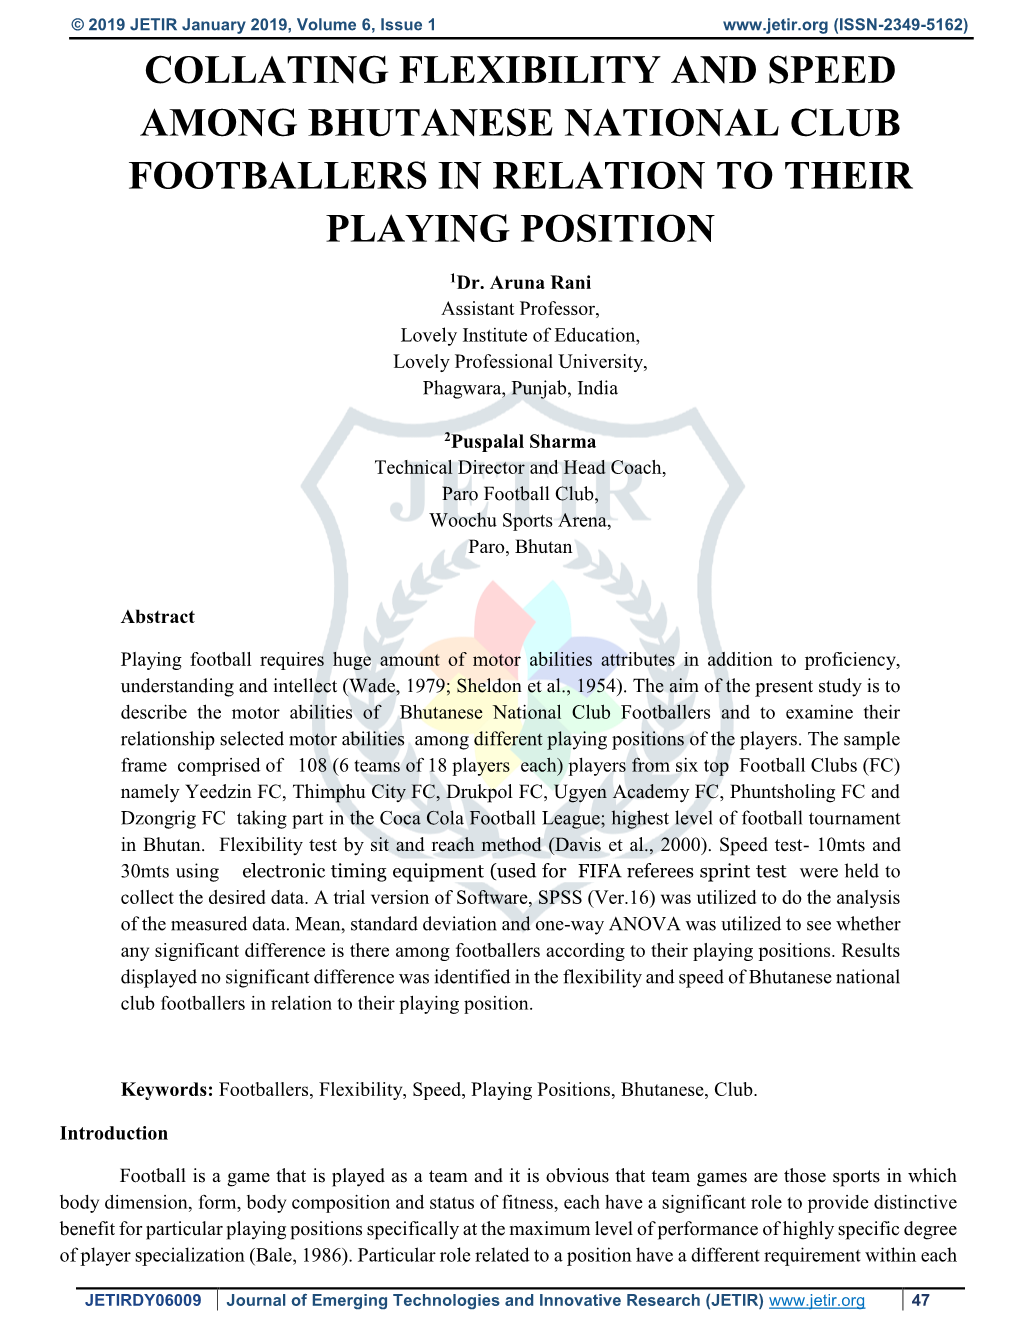 Collating Flexibility and Speed Among Bhutanese National Club Footballers in Relation to Their Playing Position